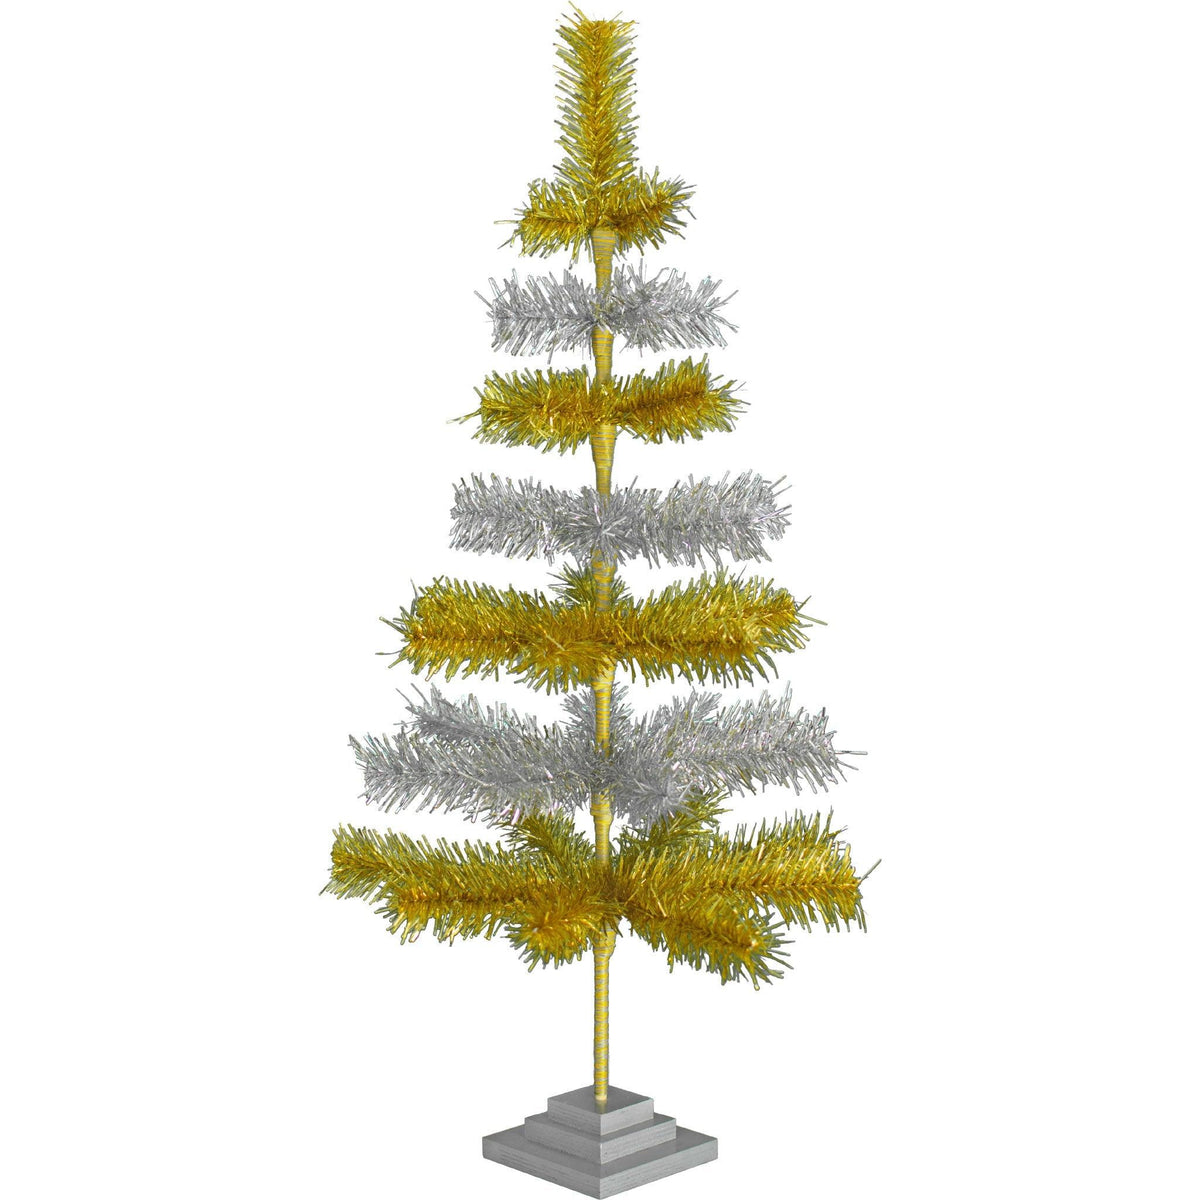 36in tall Shiny Gold and Metallic Silver Layered Tinsel Christmas Trees on sale at leedisplay.com